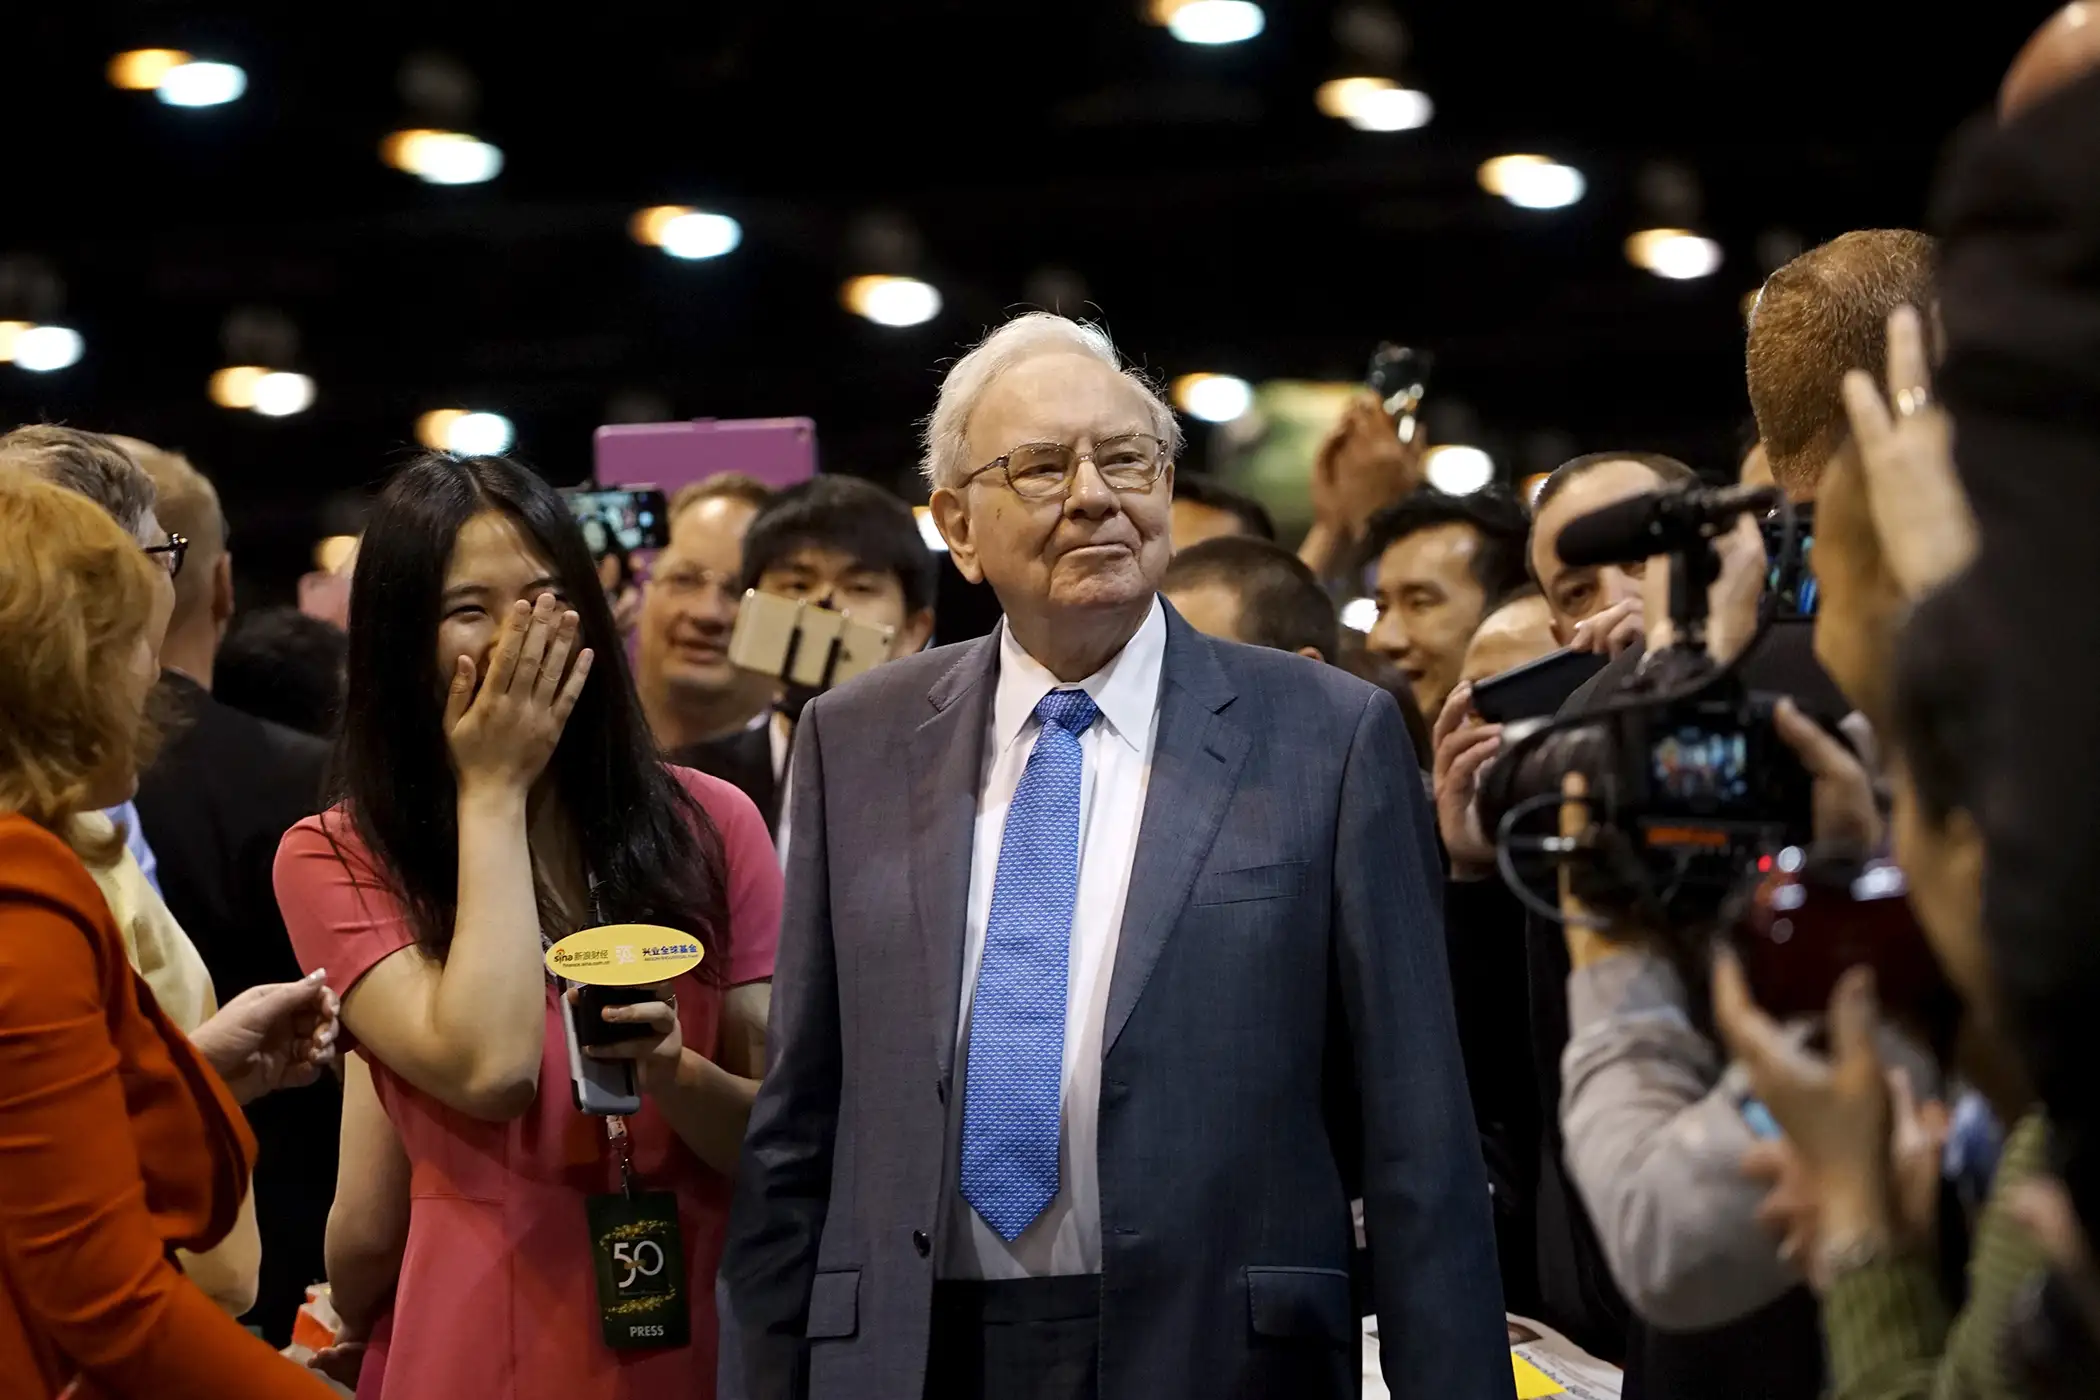 Berkshire Hathaway CEO Warren Buffett reacts after throwing in a newspaper throwing contest prior to the Berkshire annual meeting in Omaha, Nebraska May 2, 2015.